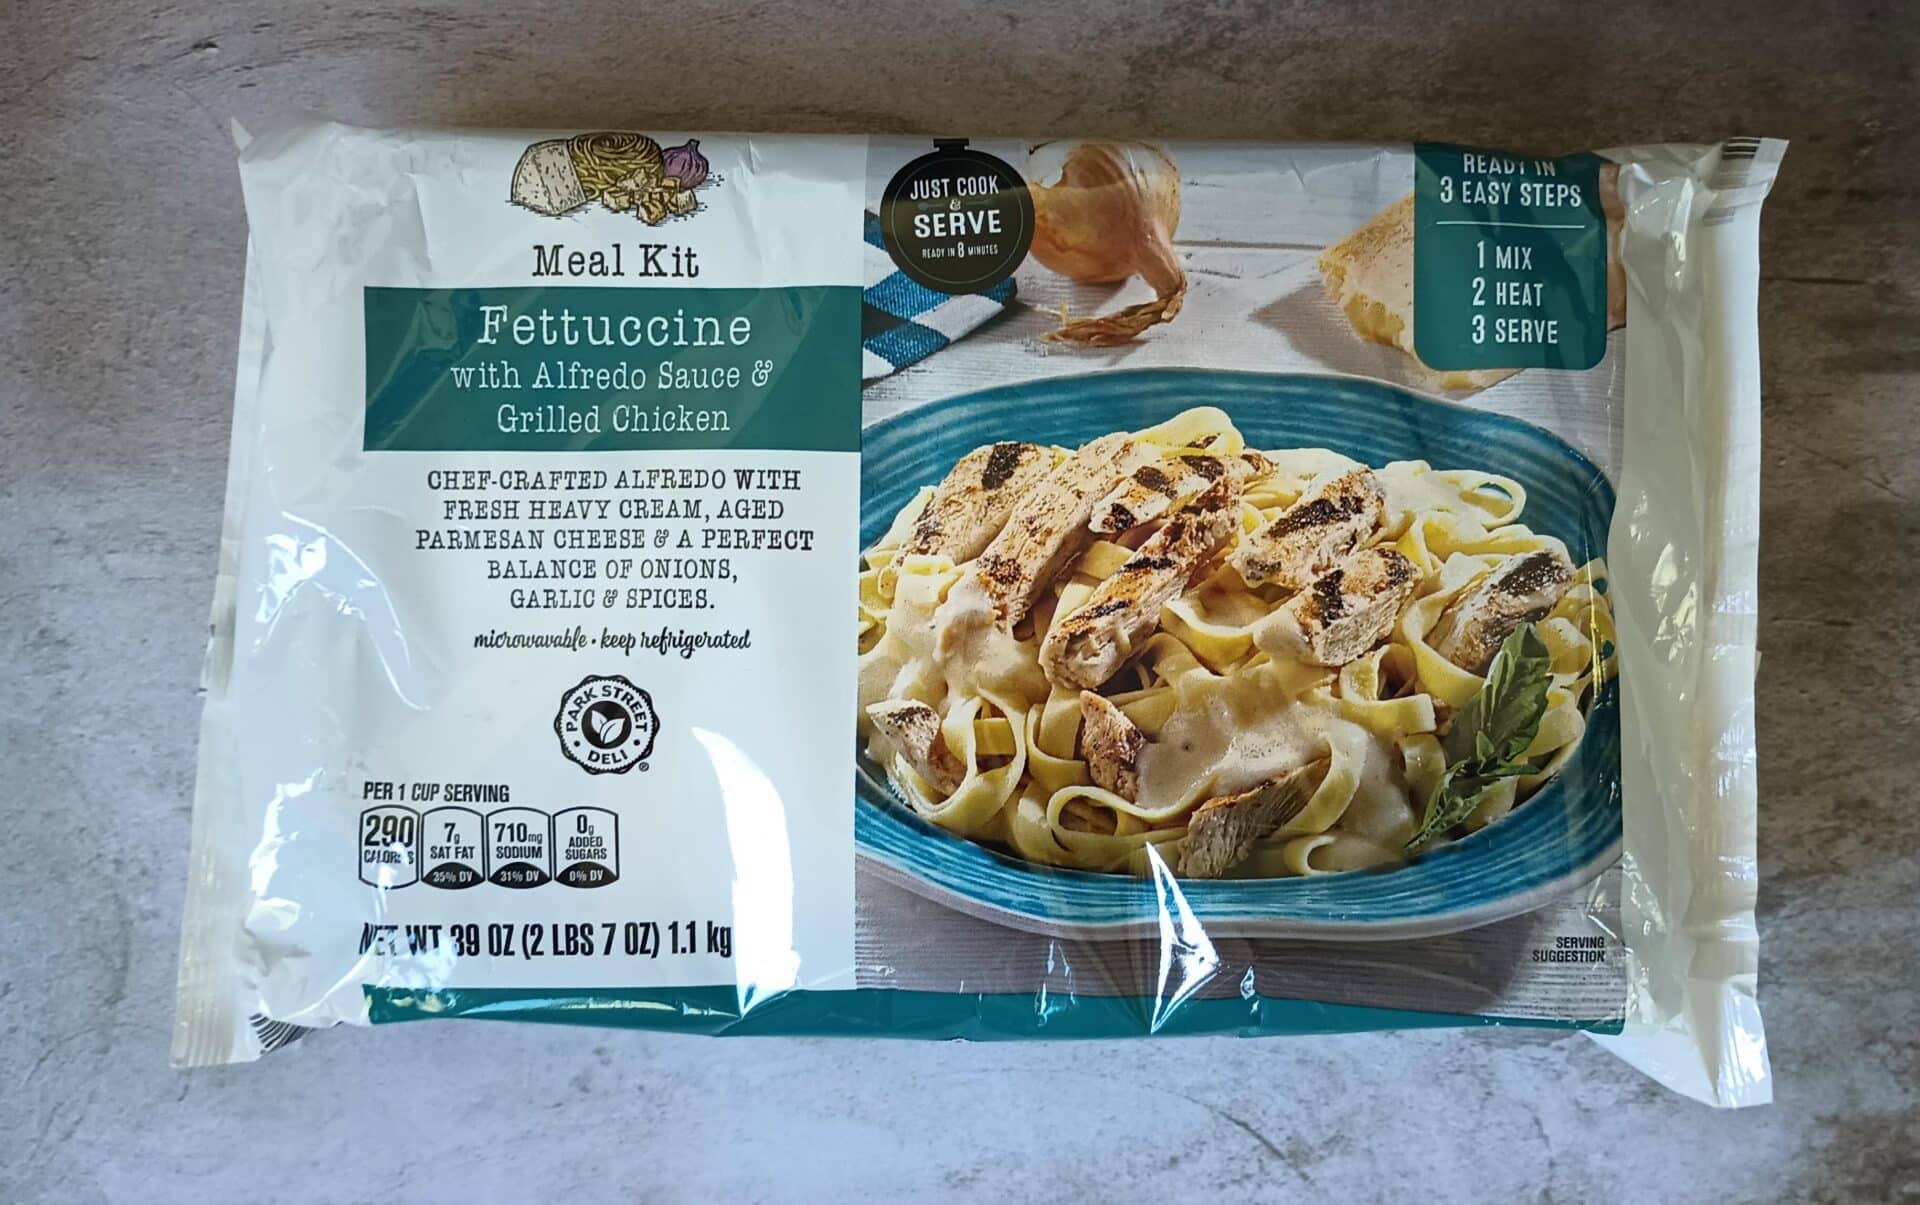 Park Street Deli Fettuccine with Alfredo Sauce and Grilled Chicken Meal Kit